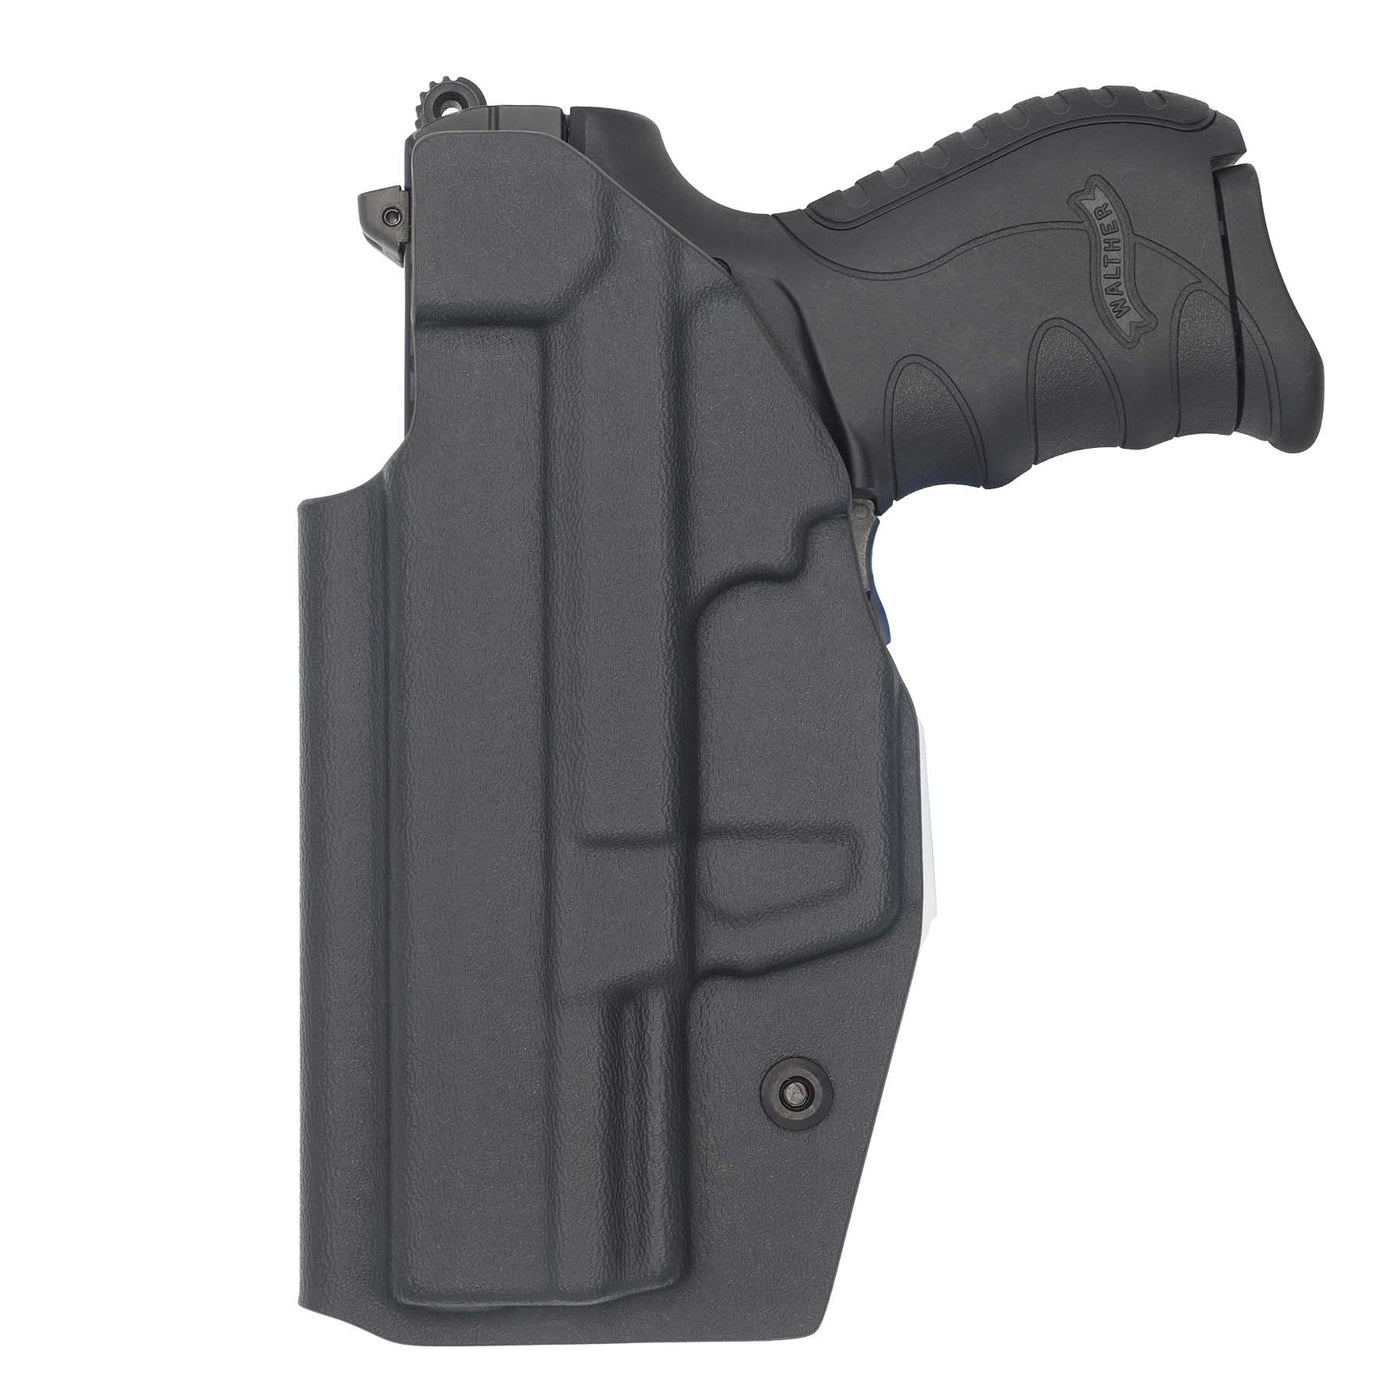 C&G Holsters IWB inside the waistband Holster for the Walther PK380 holstered rear view